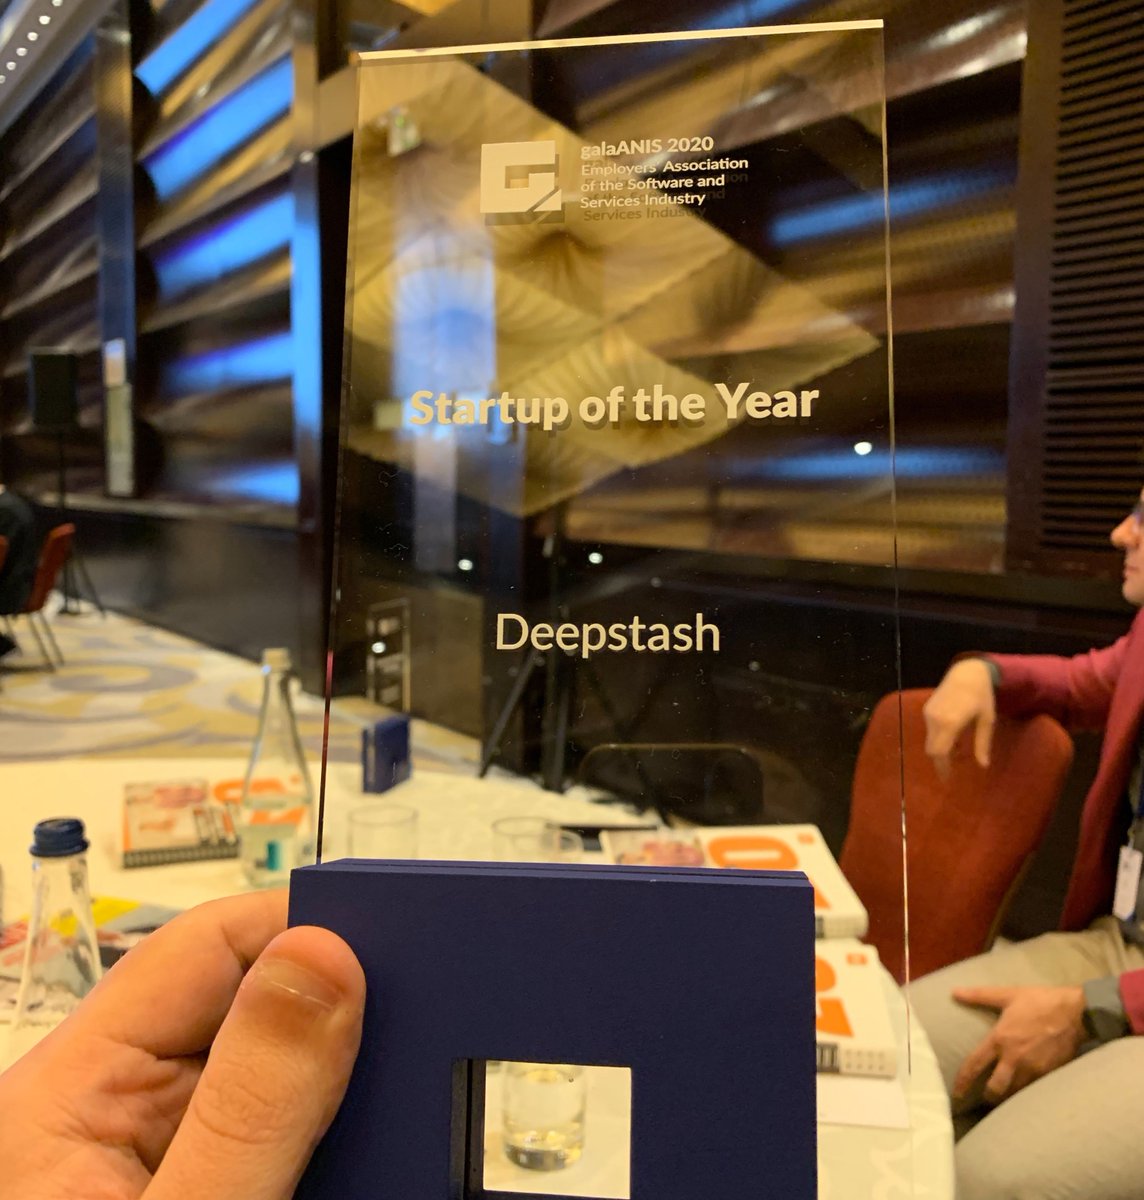 Deepstash just won the ANIS #StartupOfTheYear award. Some of our team members couldn't make it in the group photo, so our resident meme lord Cristian made sure we're all summoned. Small but happy 😀 team!